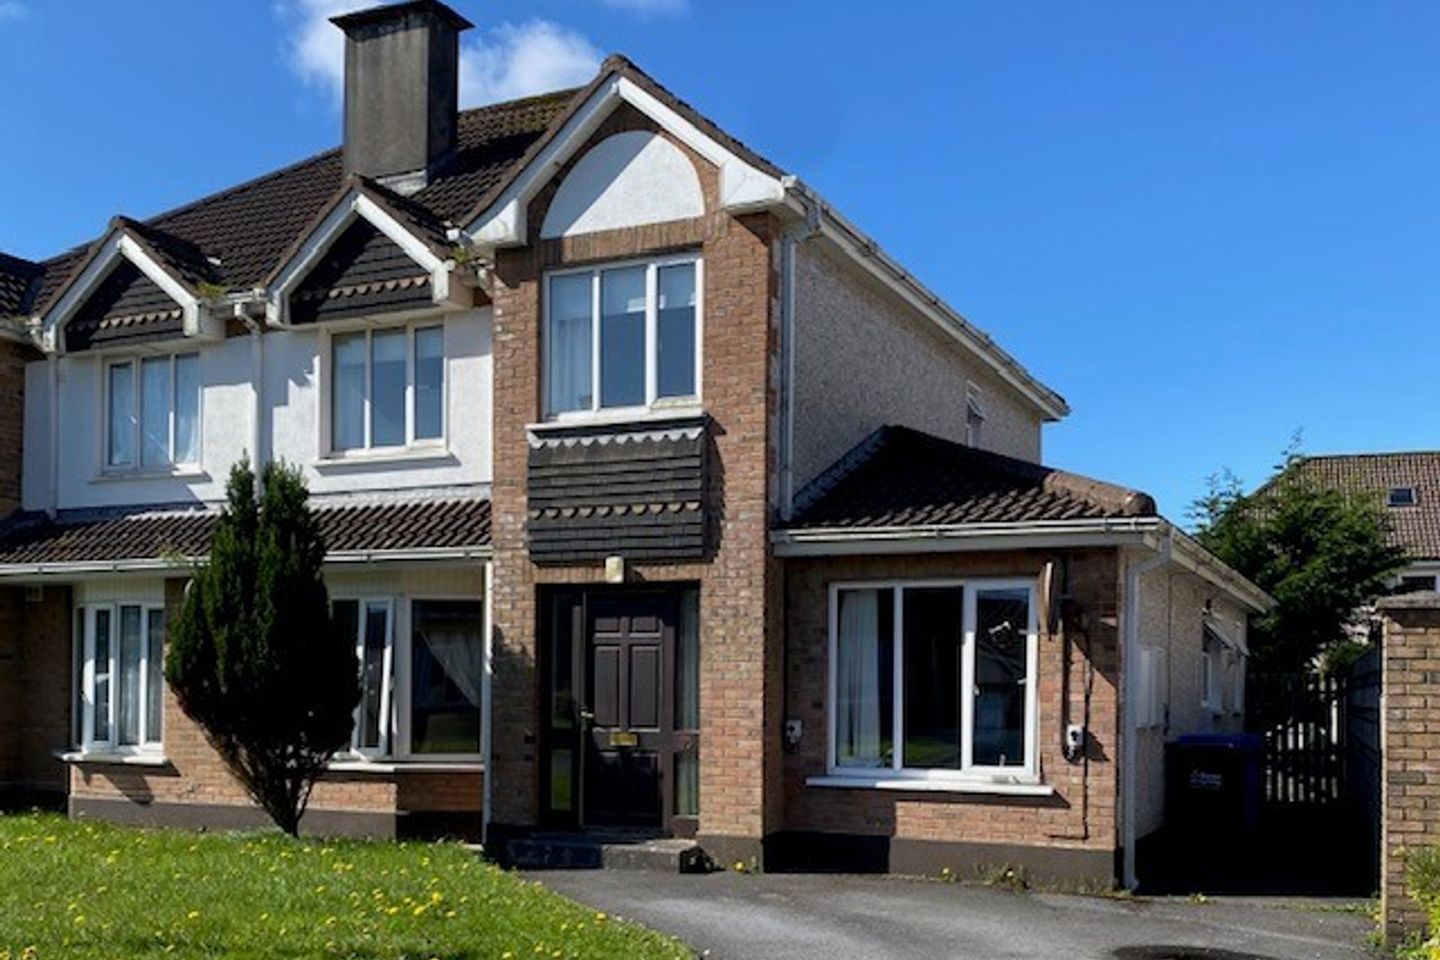 89 Ros Ard, Cappagh Road, Knocknacarra, Co. Galway, H91F3P9